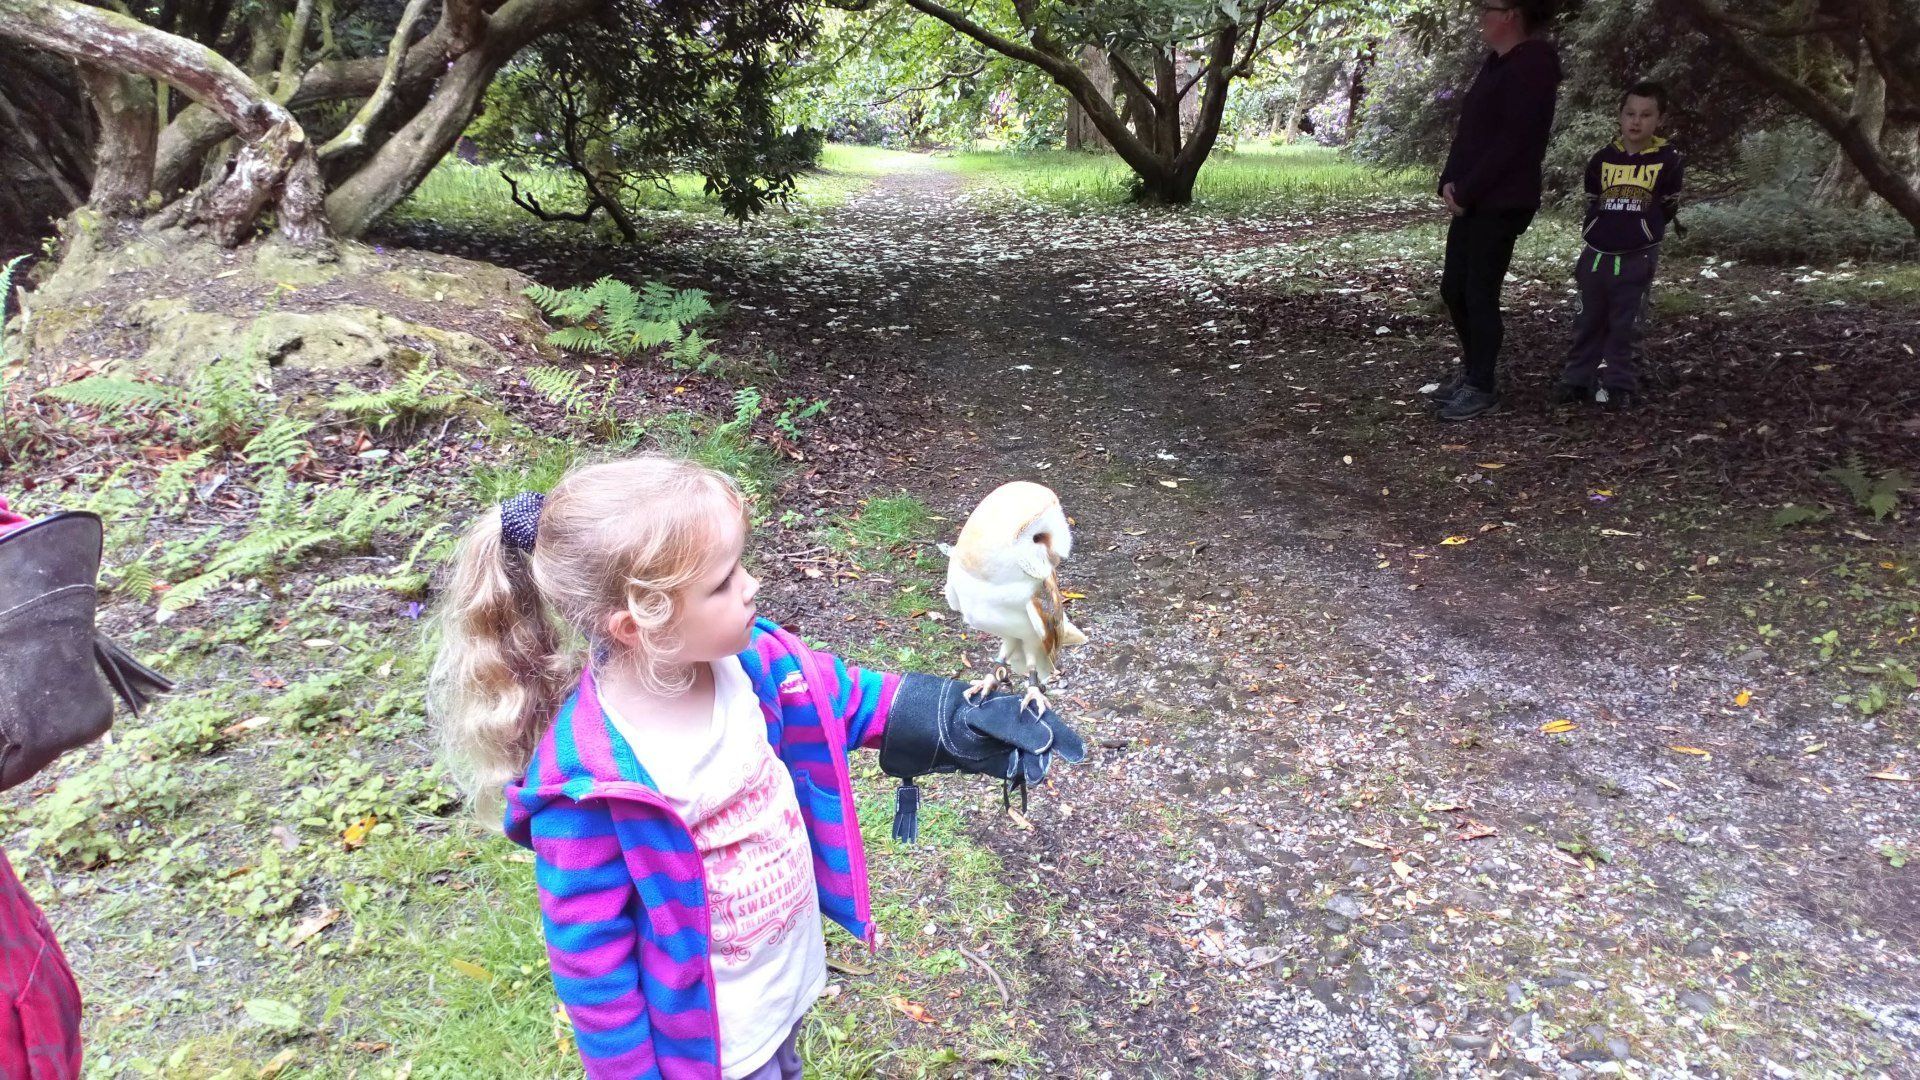 British bird of prey the barn owl, experiences for all age groups at Carmarthenshire Falconry